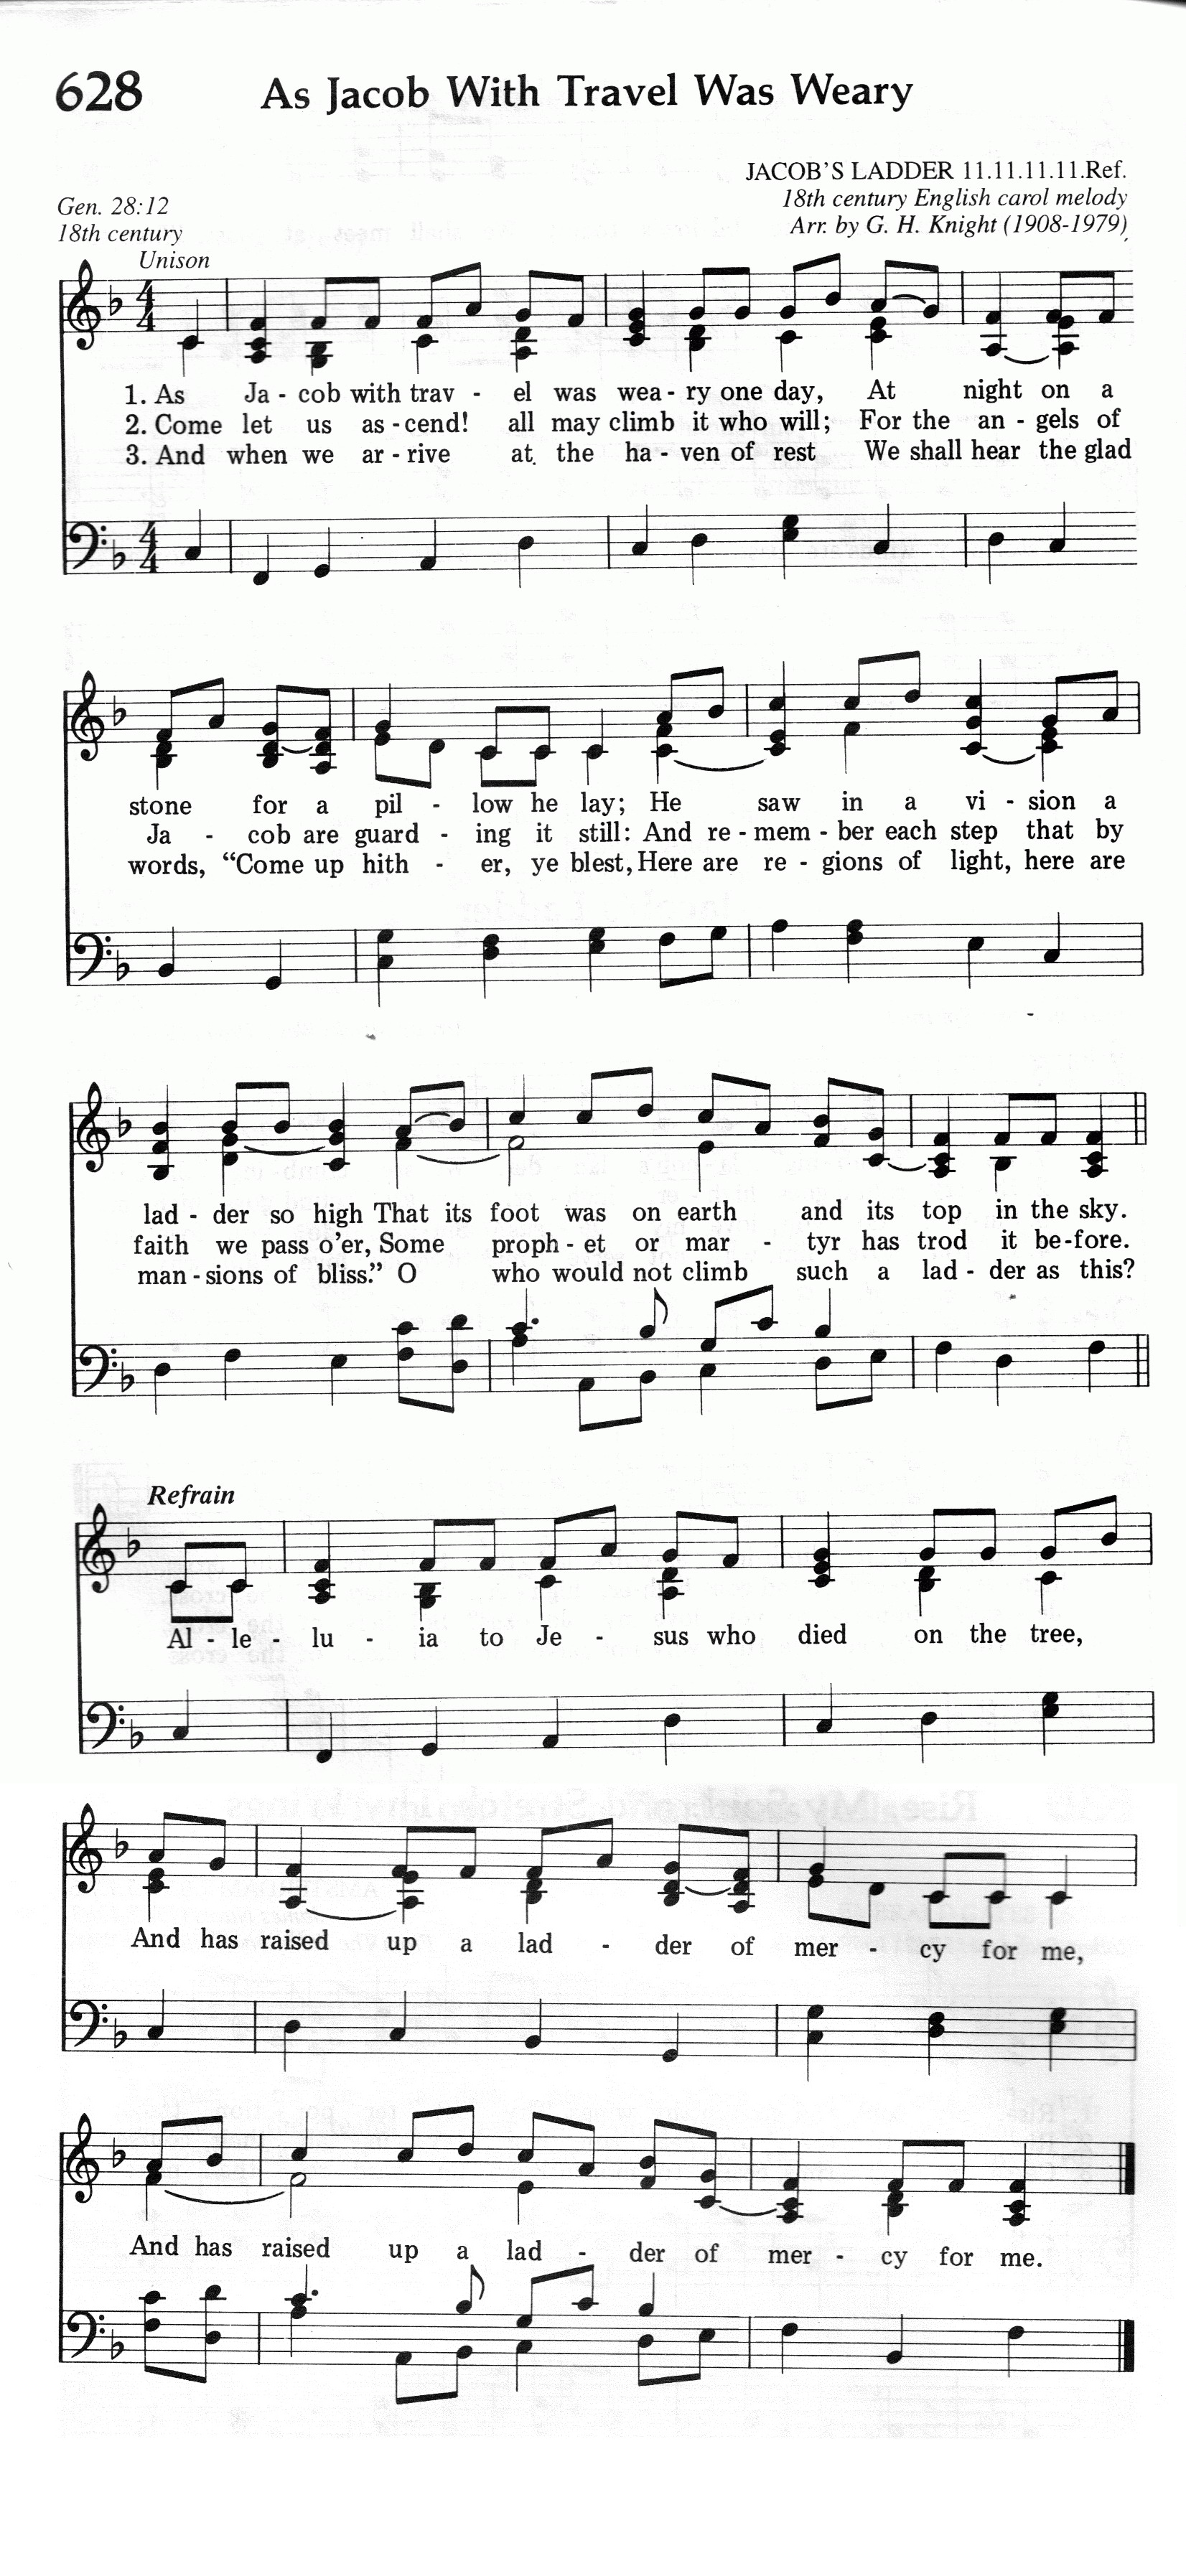 628.As Jacob With Travel Was Weary-695HYMN